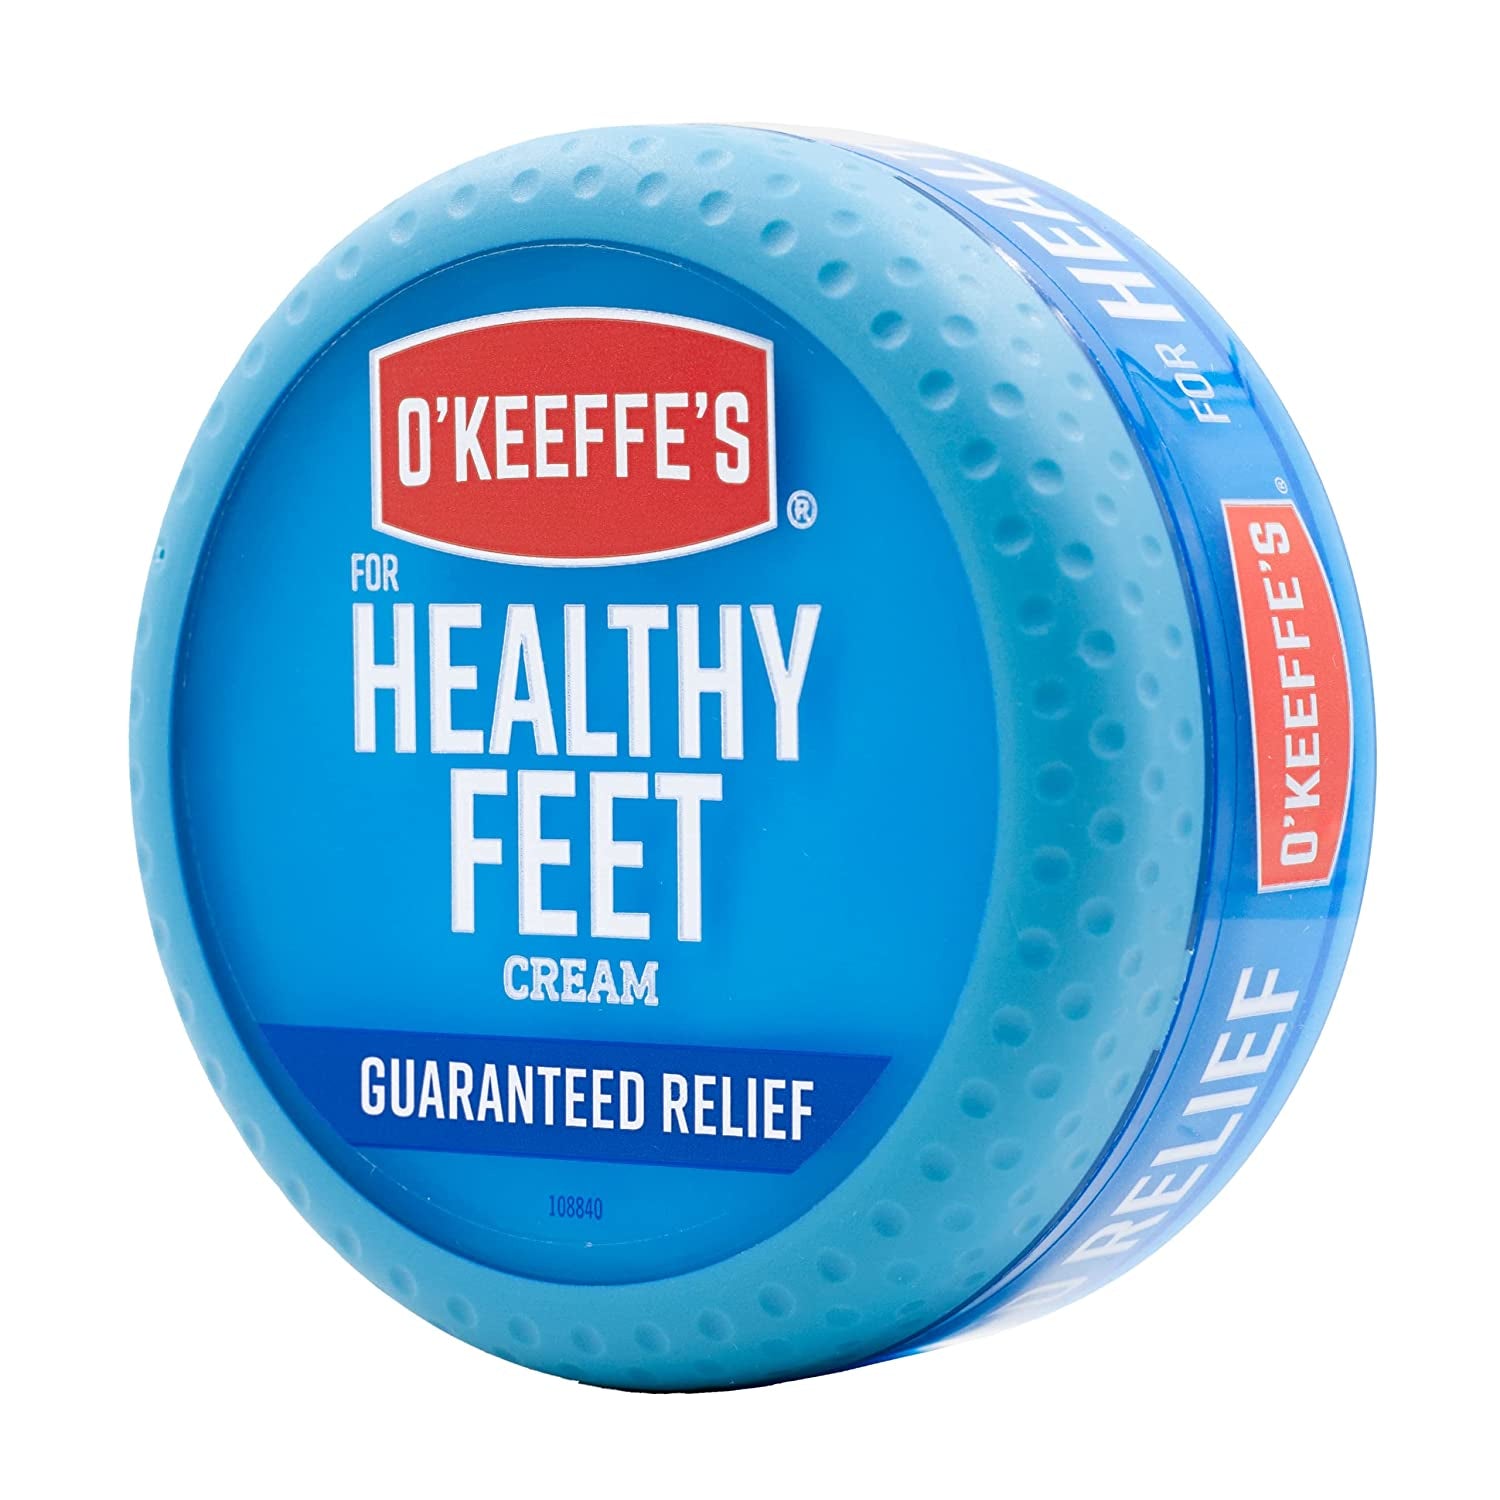 for Healthy Feet Foot Cream, Guaranteed Relief for Extremely Dry, Cracked Feet, Instantly Boosts Moisture Levels, 3.2 Ounce Jar, (Pack of 1)